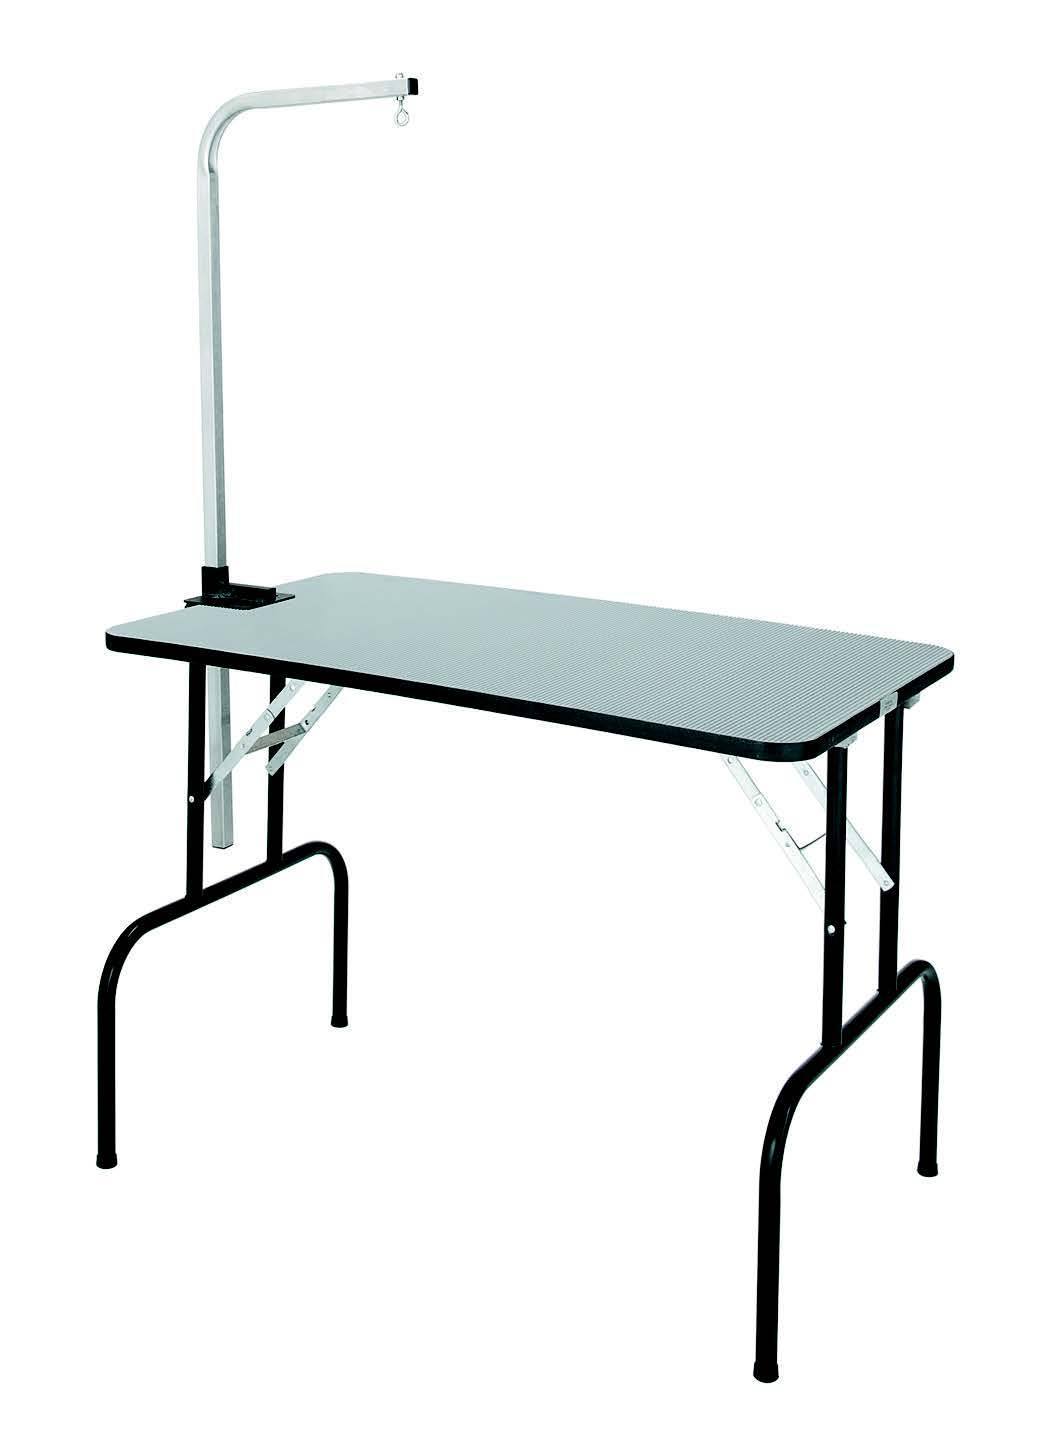 Portable Grooming Table | Folding Legs - 36" x 24"-Grooming Tables-Pet's Choice Supply